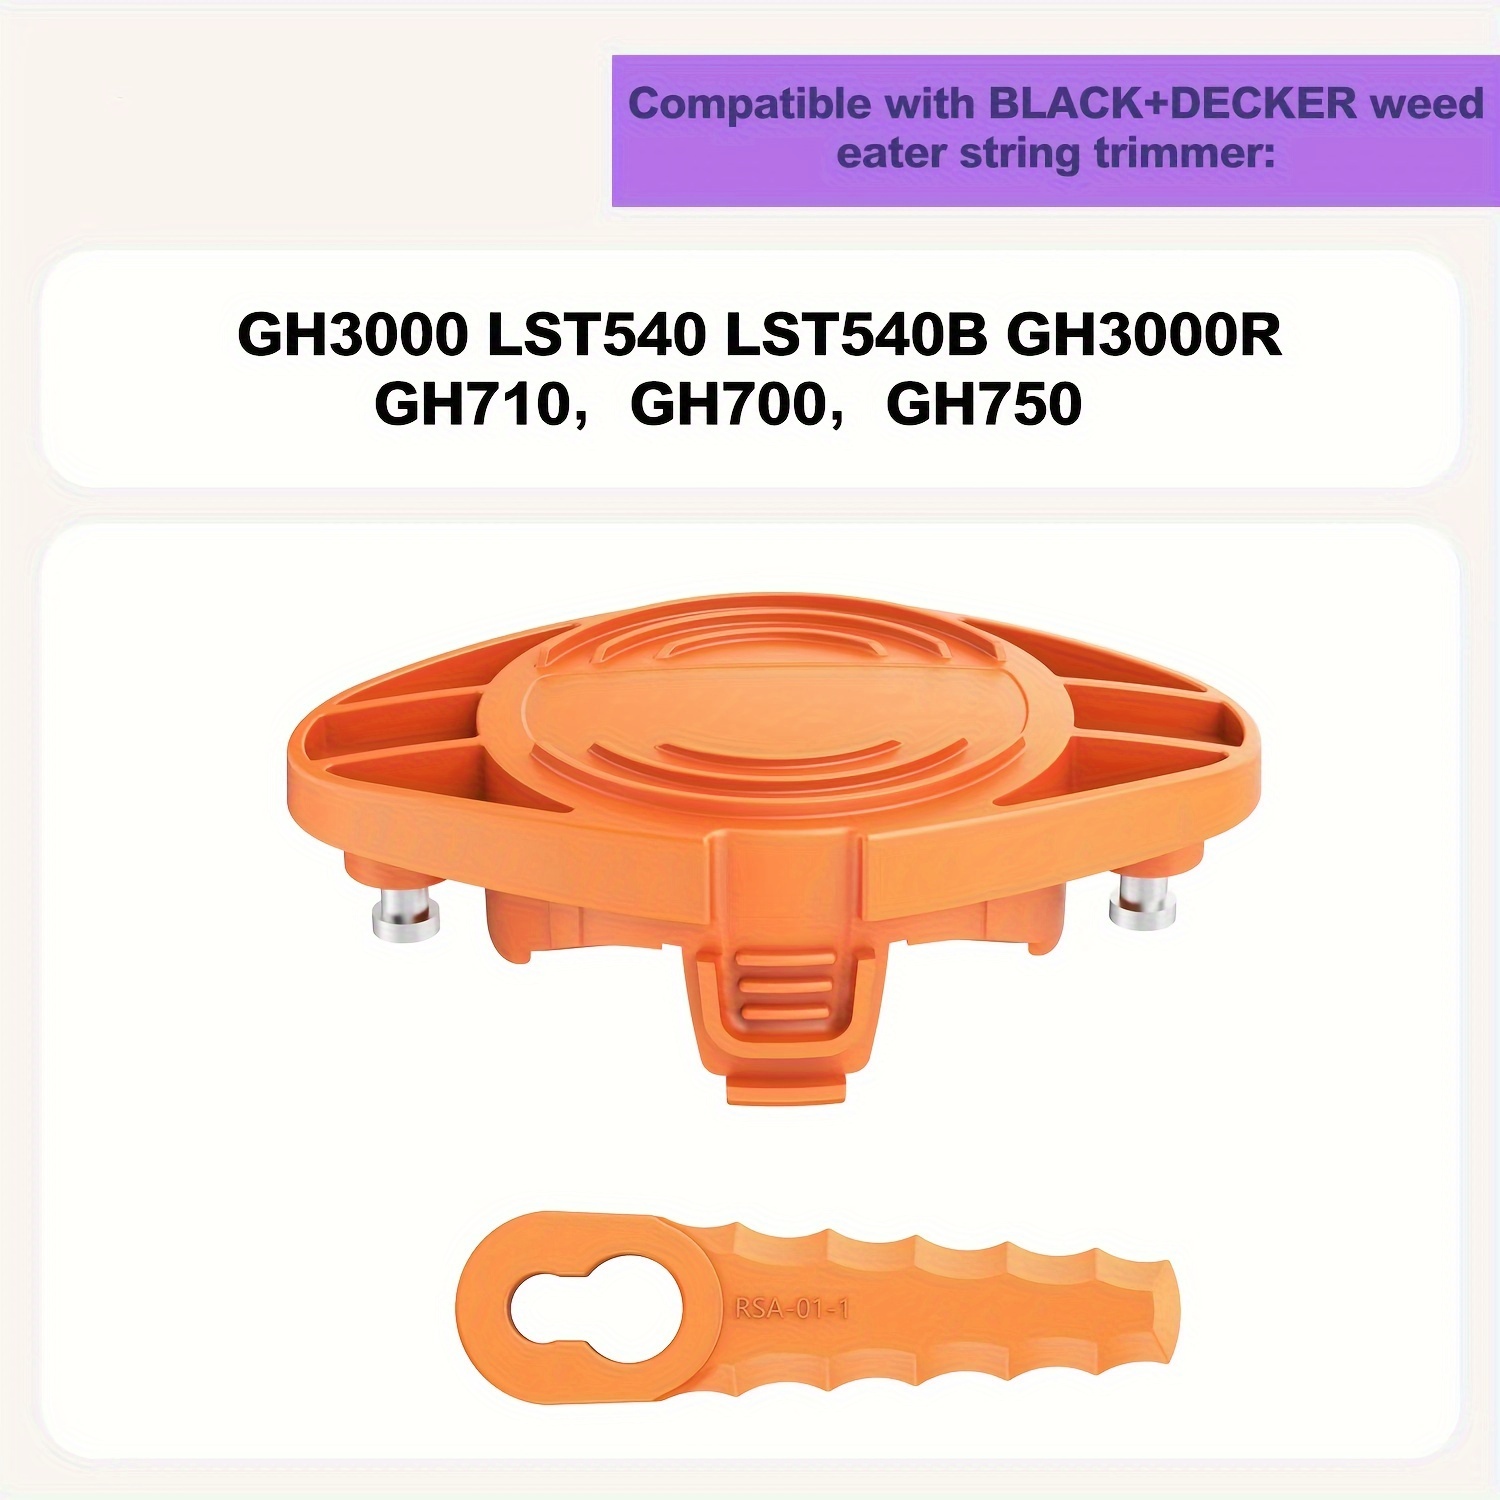 GH3000 Trimmer Spool Replacement Compatible with Black and Decker